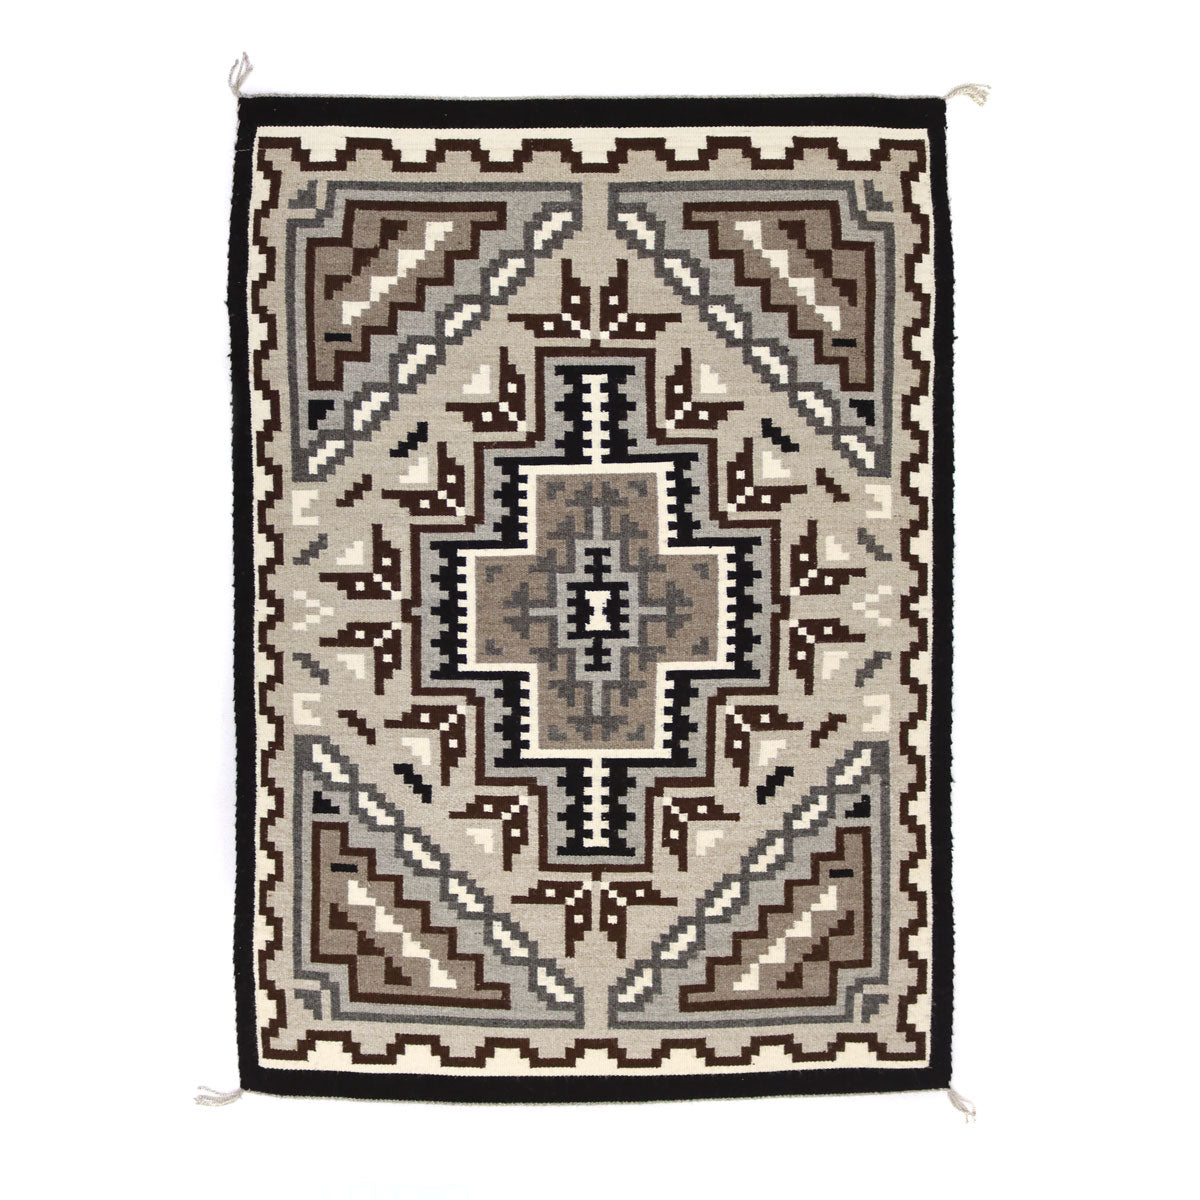 Mary H. Yazzie (d. 2020) - Navajo Contemporary Two Grey Hills Rug, 49" x 37" (T92308-1121-016)4